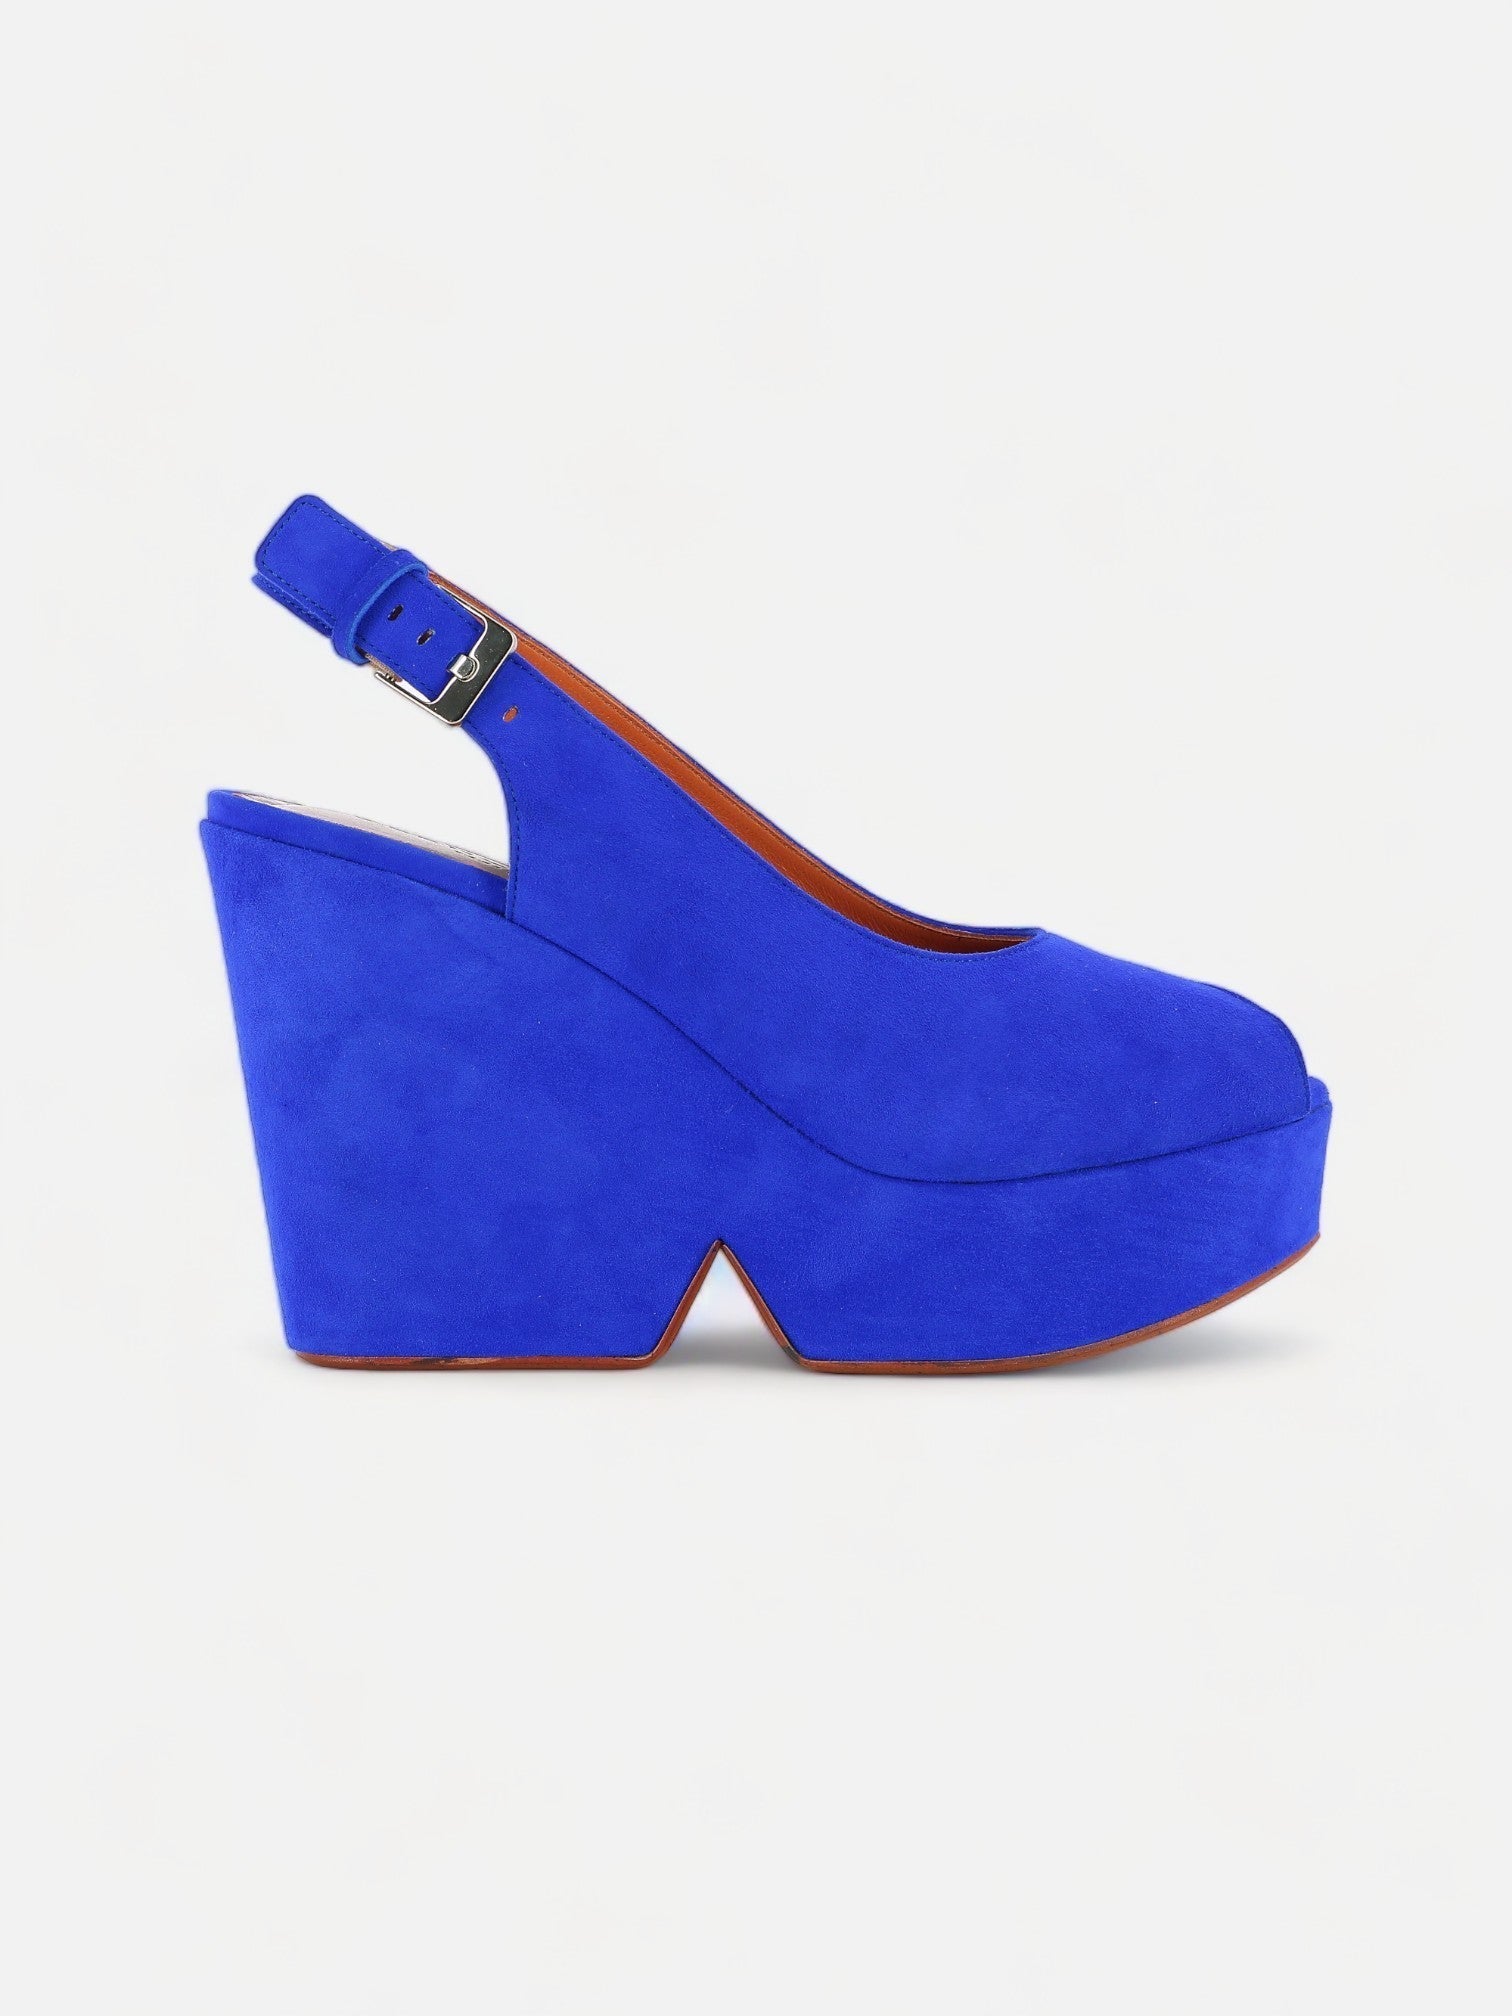 WEDGES - DYLAN wedges, suede goatskin blue - DYLAN2WHICLFM350 - Clergerie Paris - USA